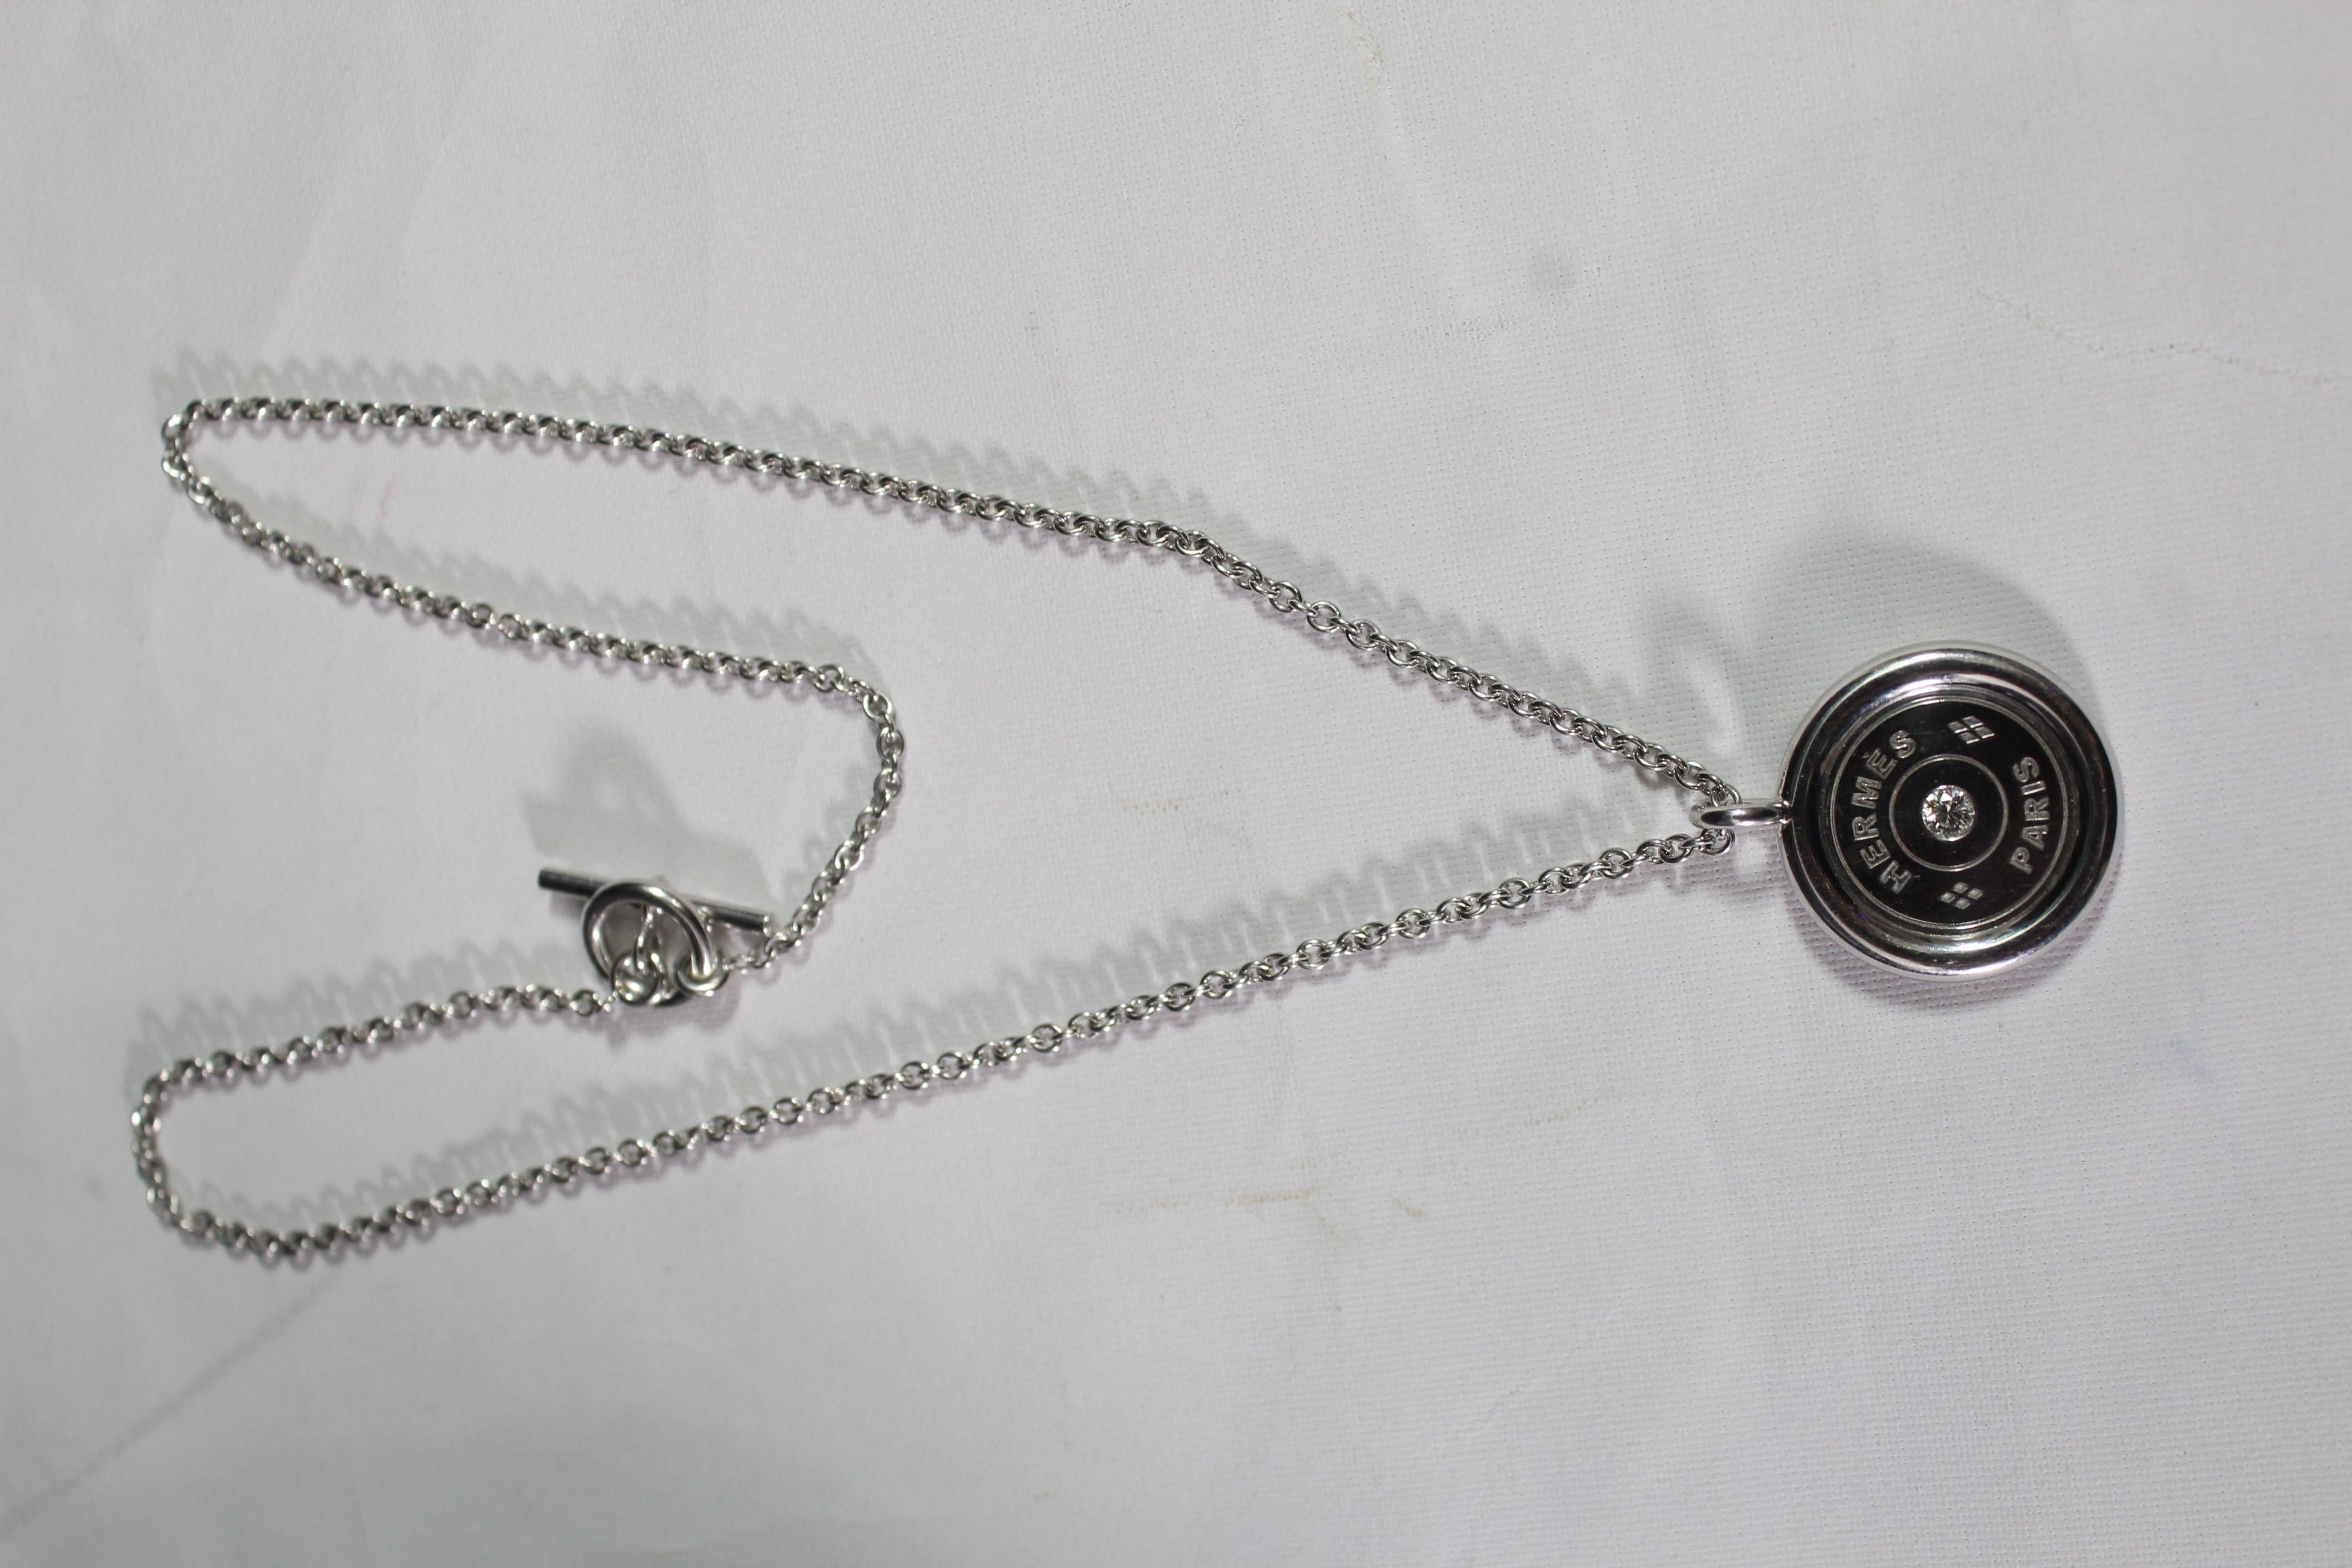 Nice Hermes Cliu de selle necklace in white gold and central diamond.

Good conditon

Medium model

Comes with box